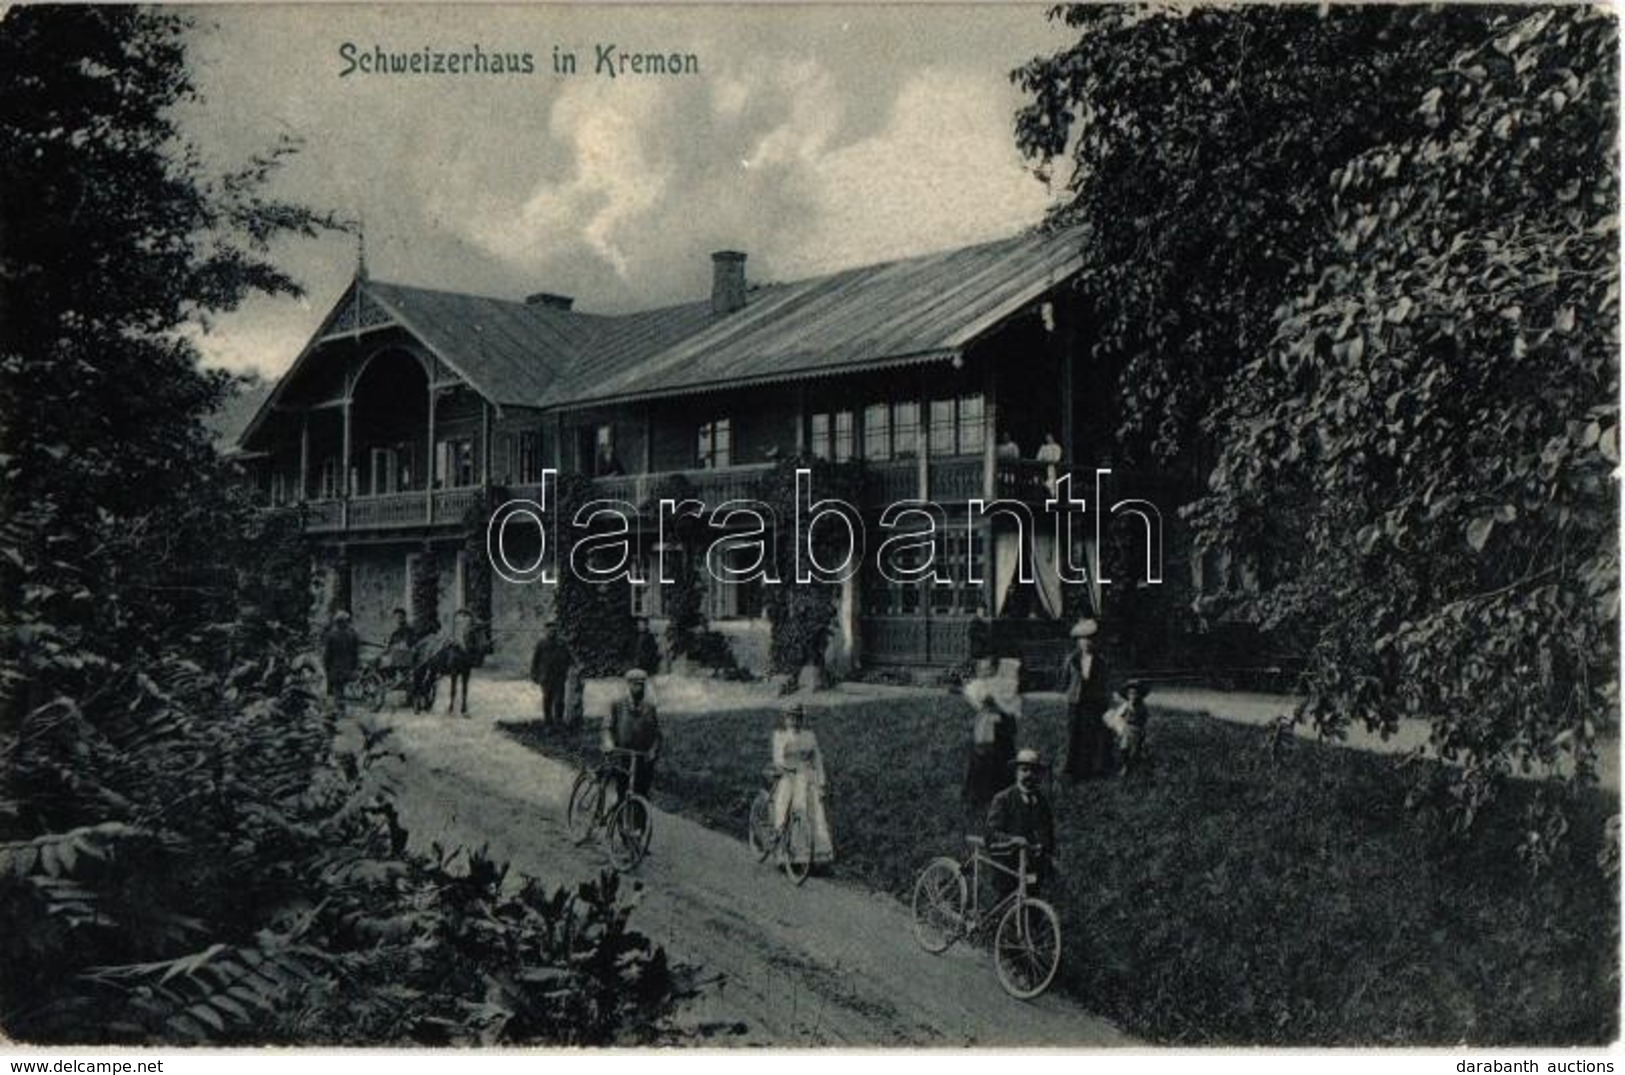 T2/T3 Ragana, Kremon; Schweizerhaus / Chalet And Restaurant, People With Bicycles. Lenz & Rudolff. Knackstedt & Näther L - Unclassified